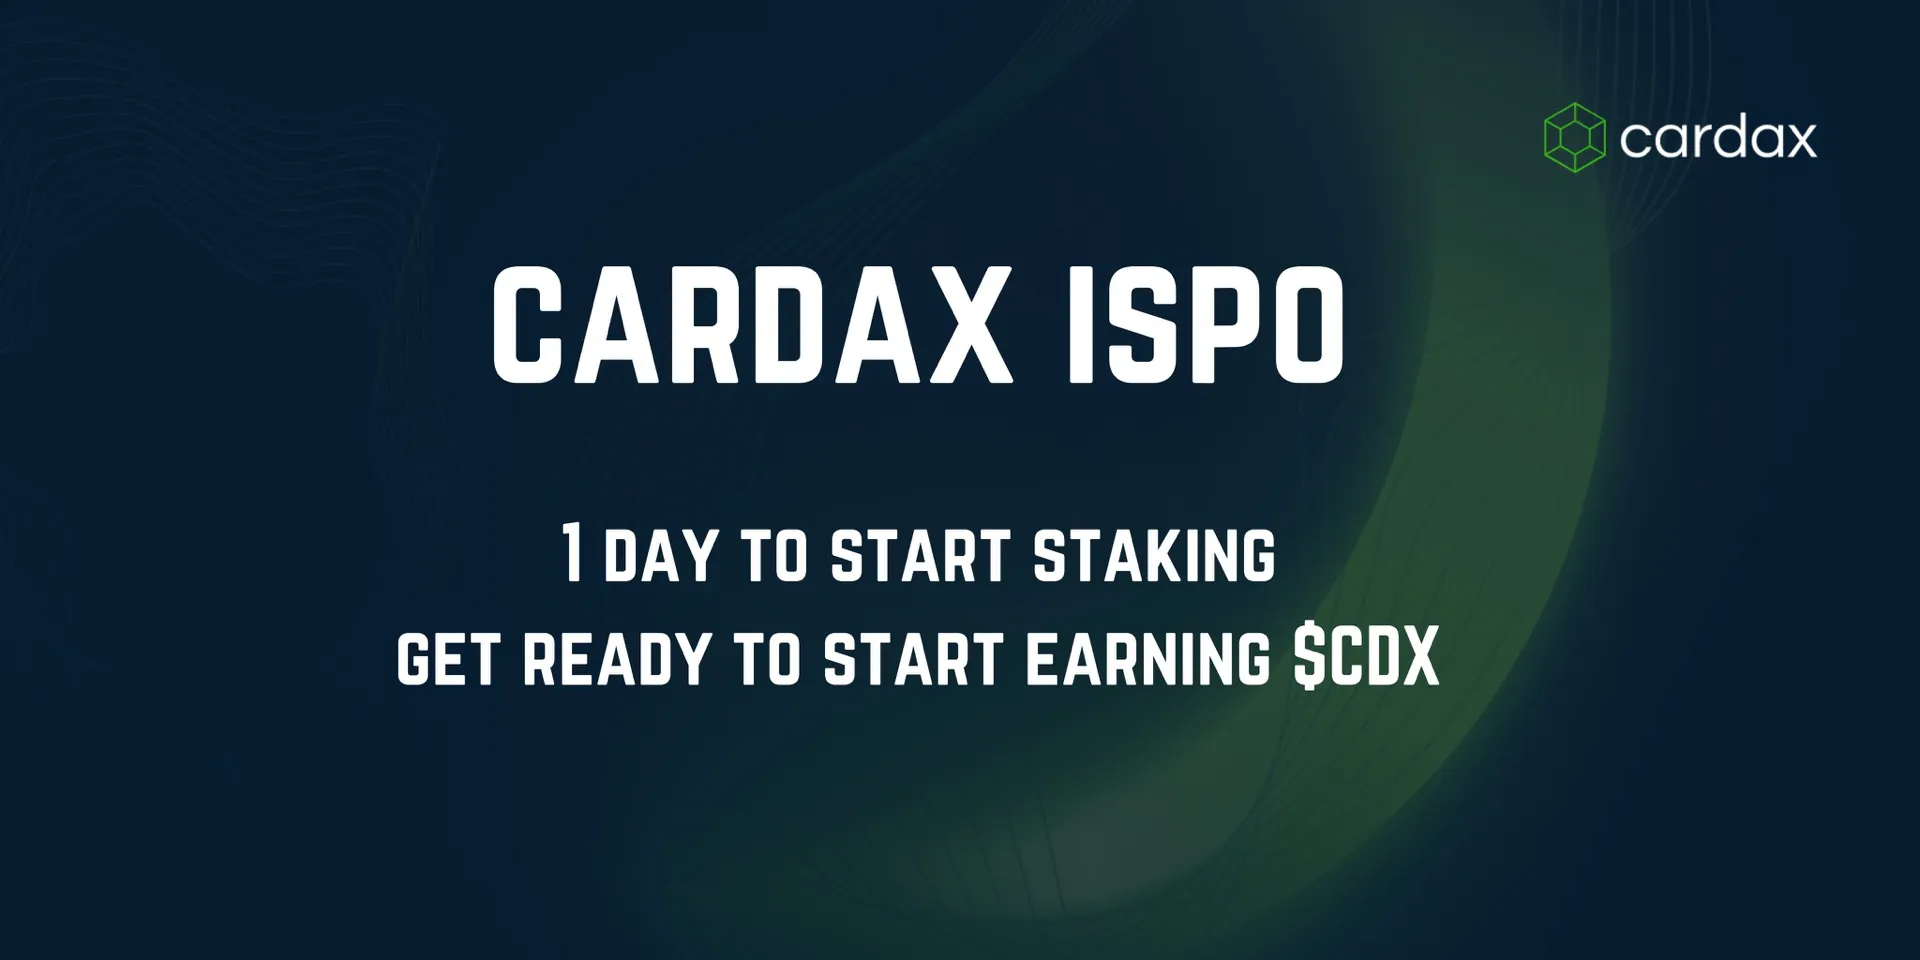 Cardax launches another ISPO after financing troubles